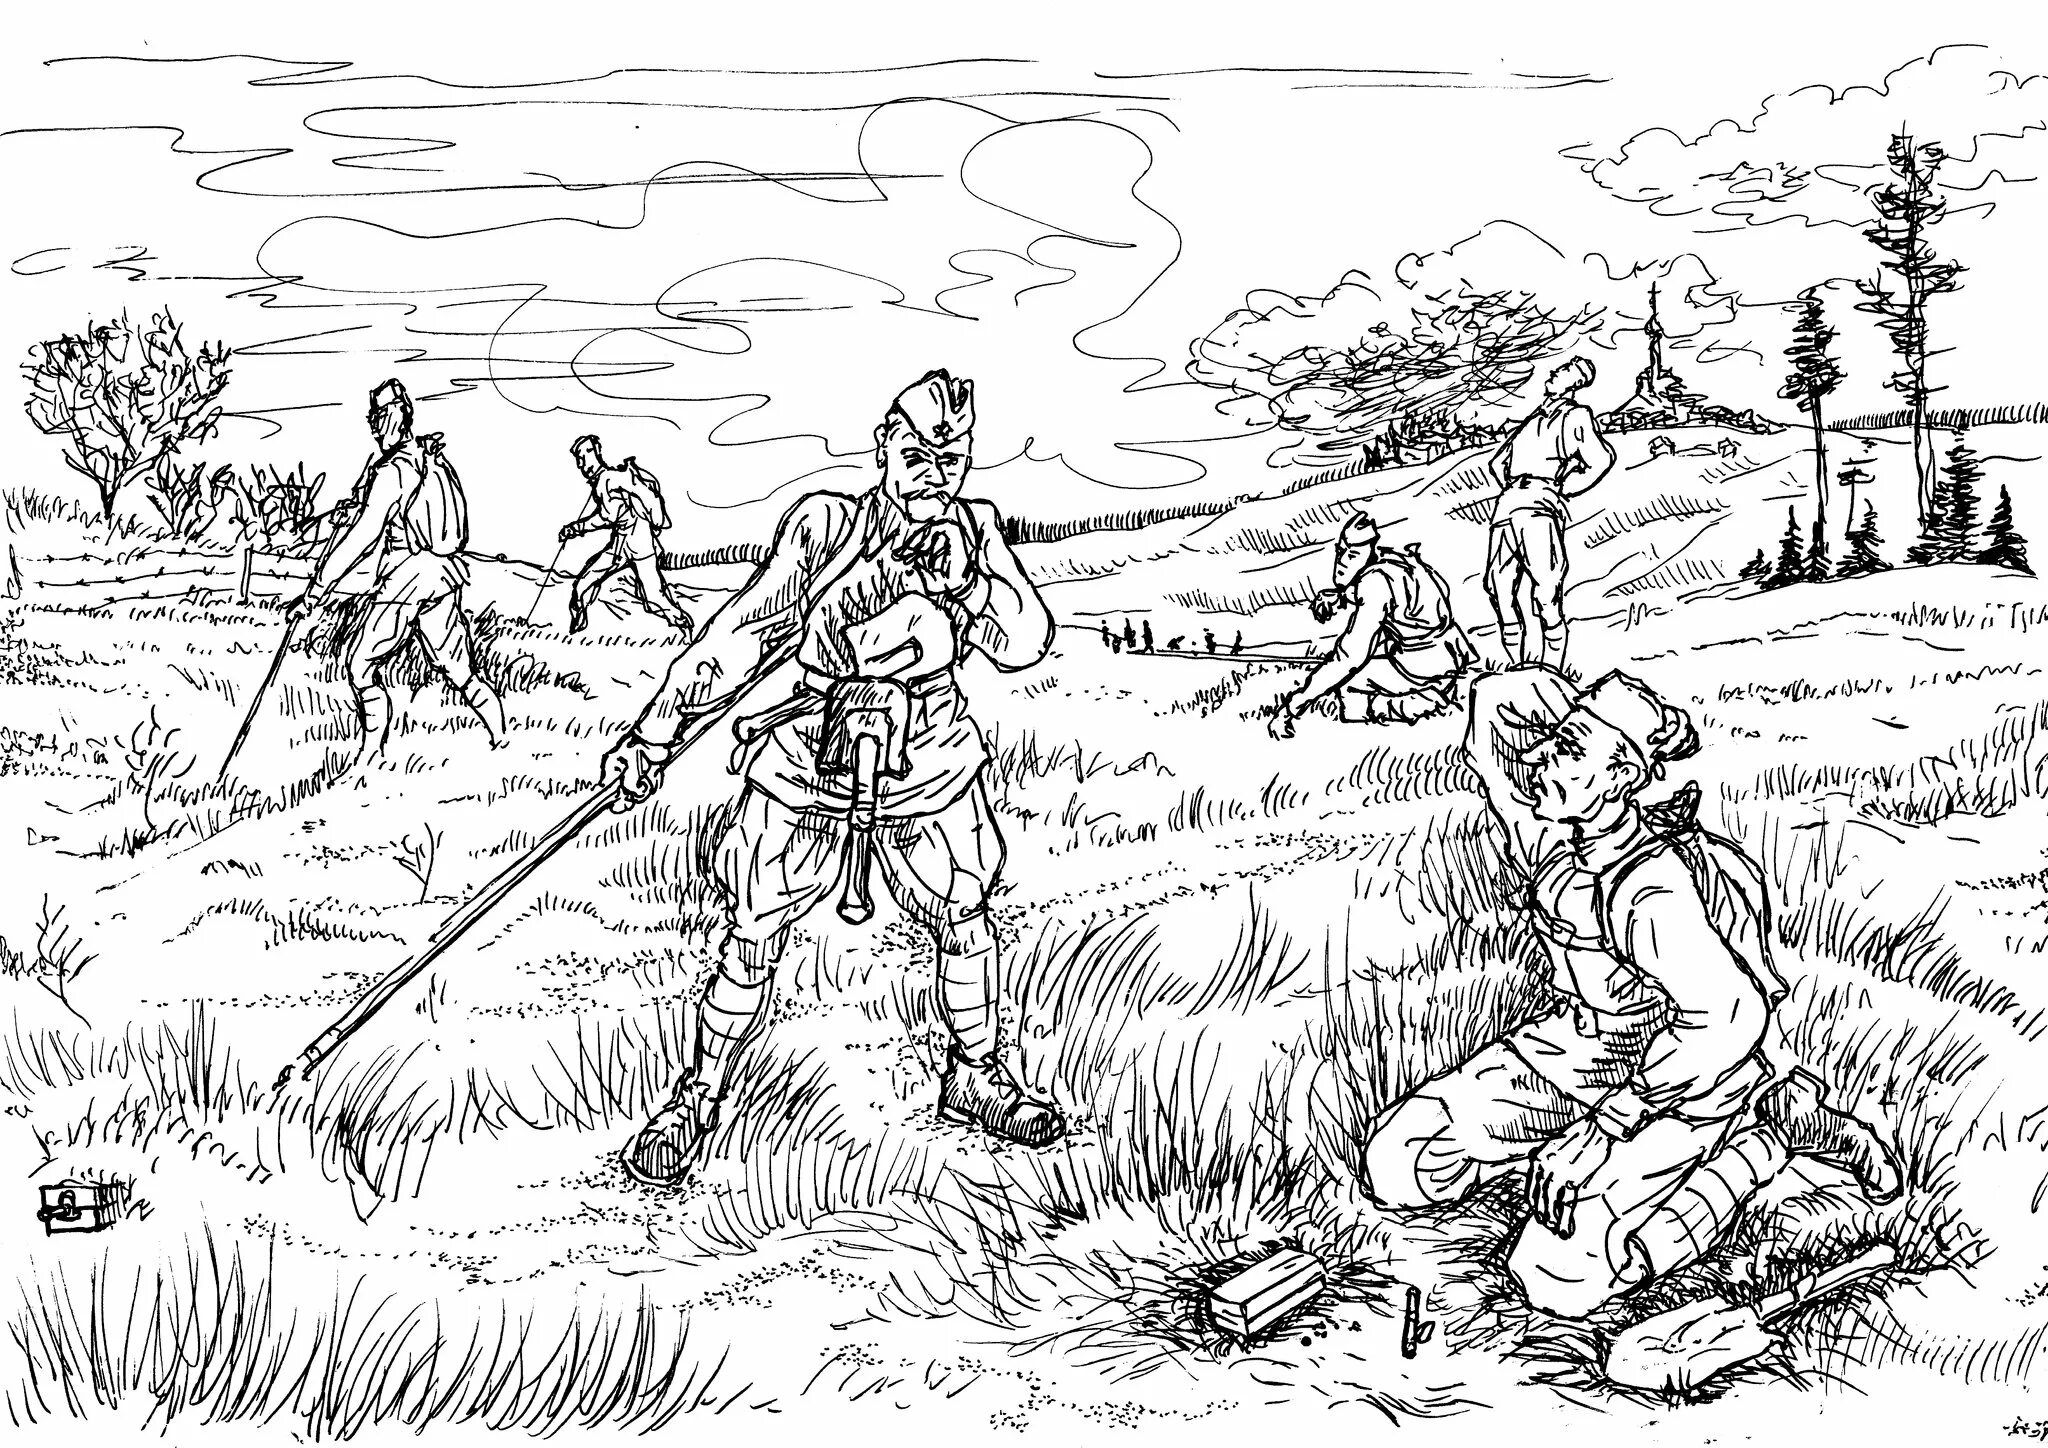 Inviting military drawing for children